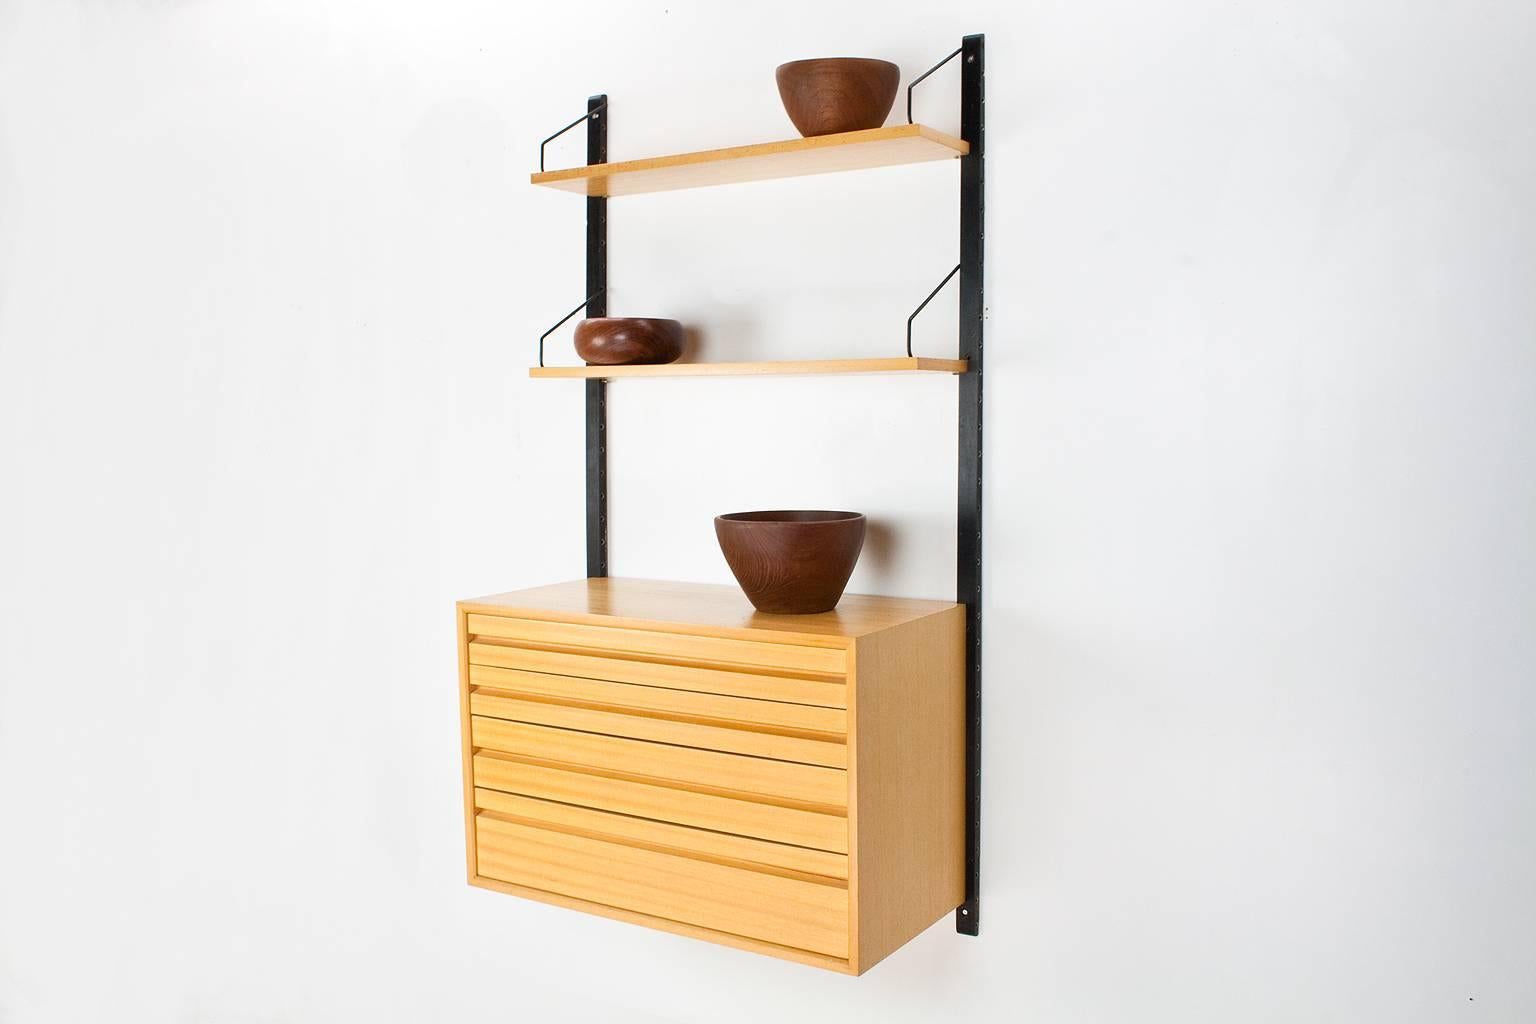 Original Danish wall unit, model Royal, designed by Poul Cadovius in the 1950s for Cado, Denmark. This listed unit was produced by Cado in Denmark in the 1960s. The elements features a lovely quality oak veneer. 

Measure: The unit consists of two